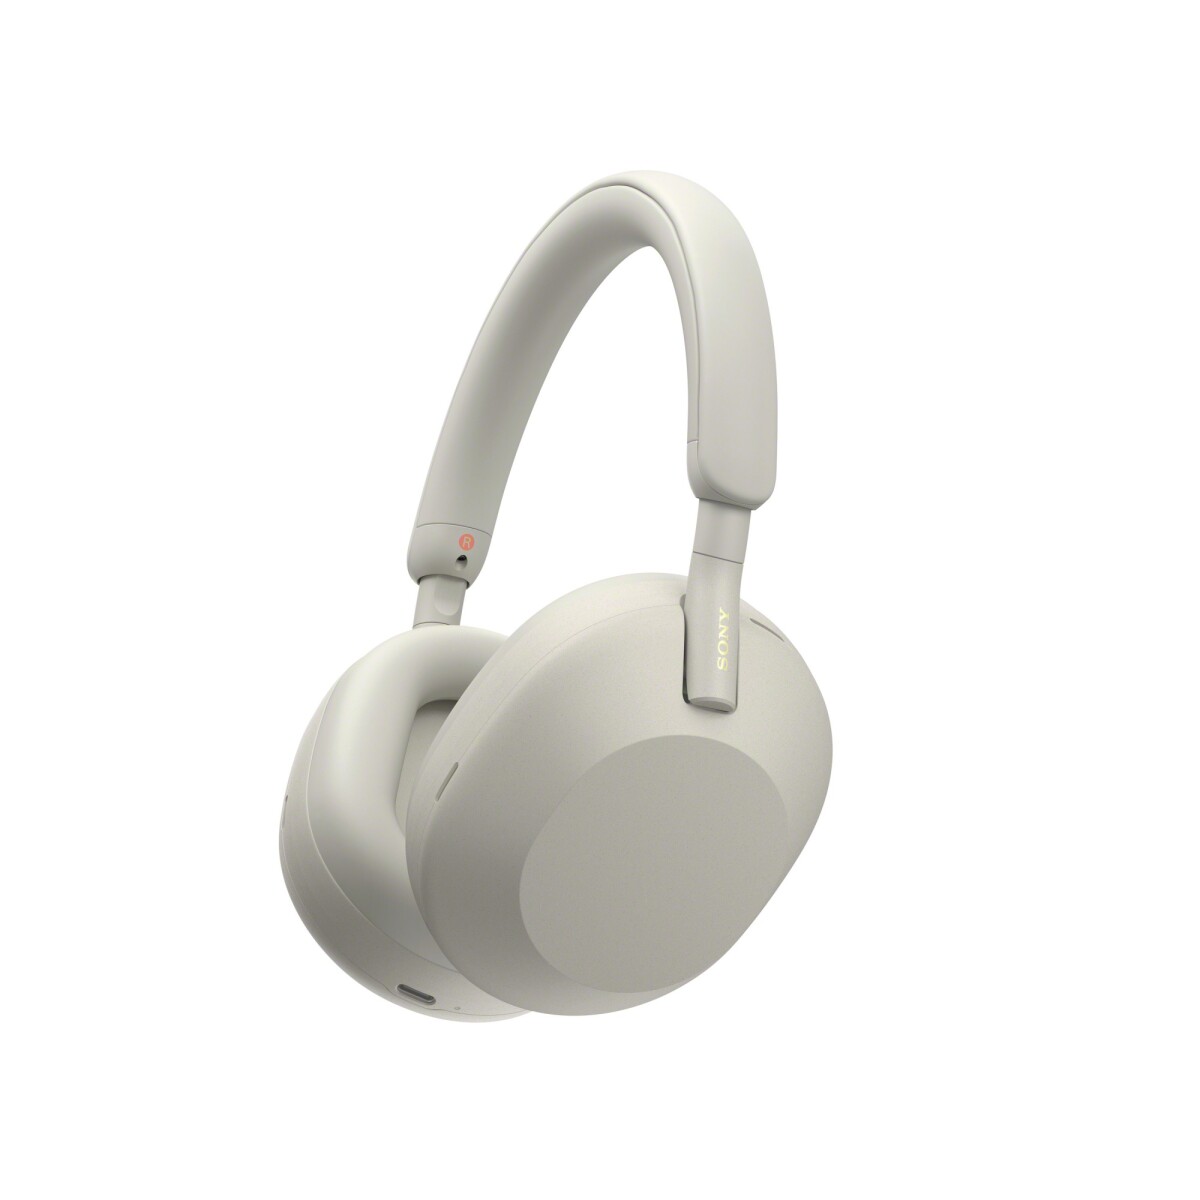 Auriculares inalámbricos Sony con Noise Cancelling WH-1000XM5 